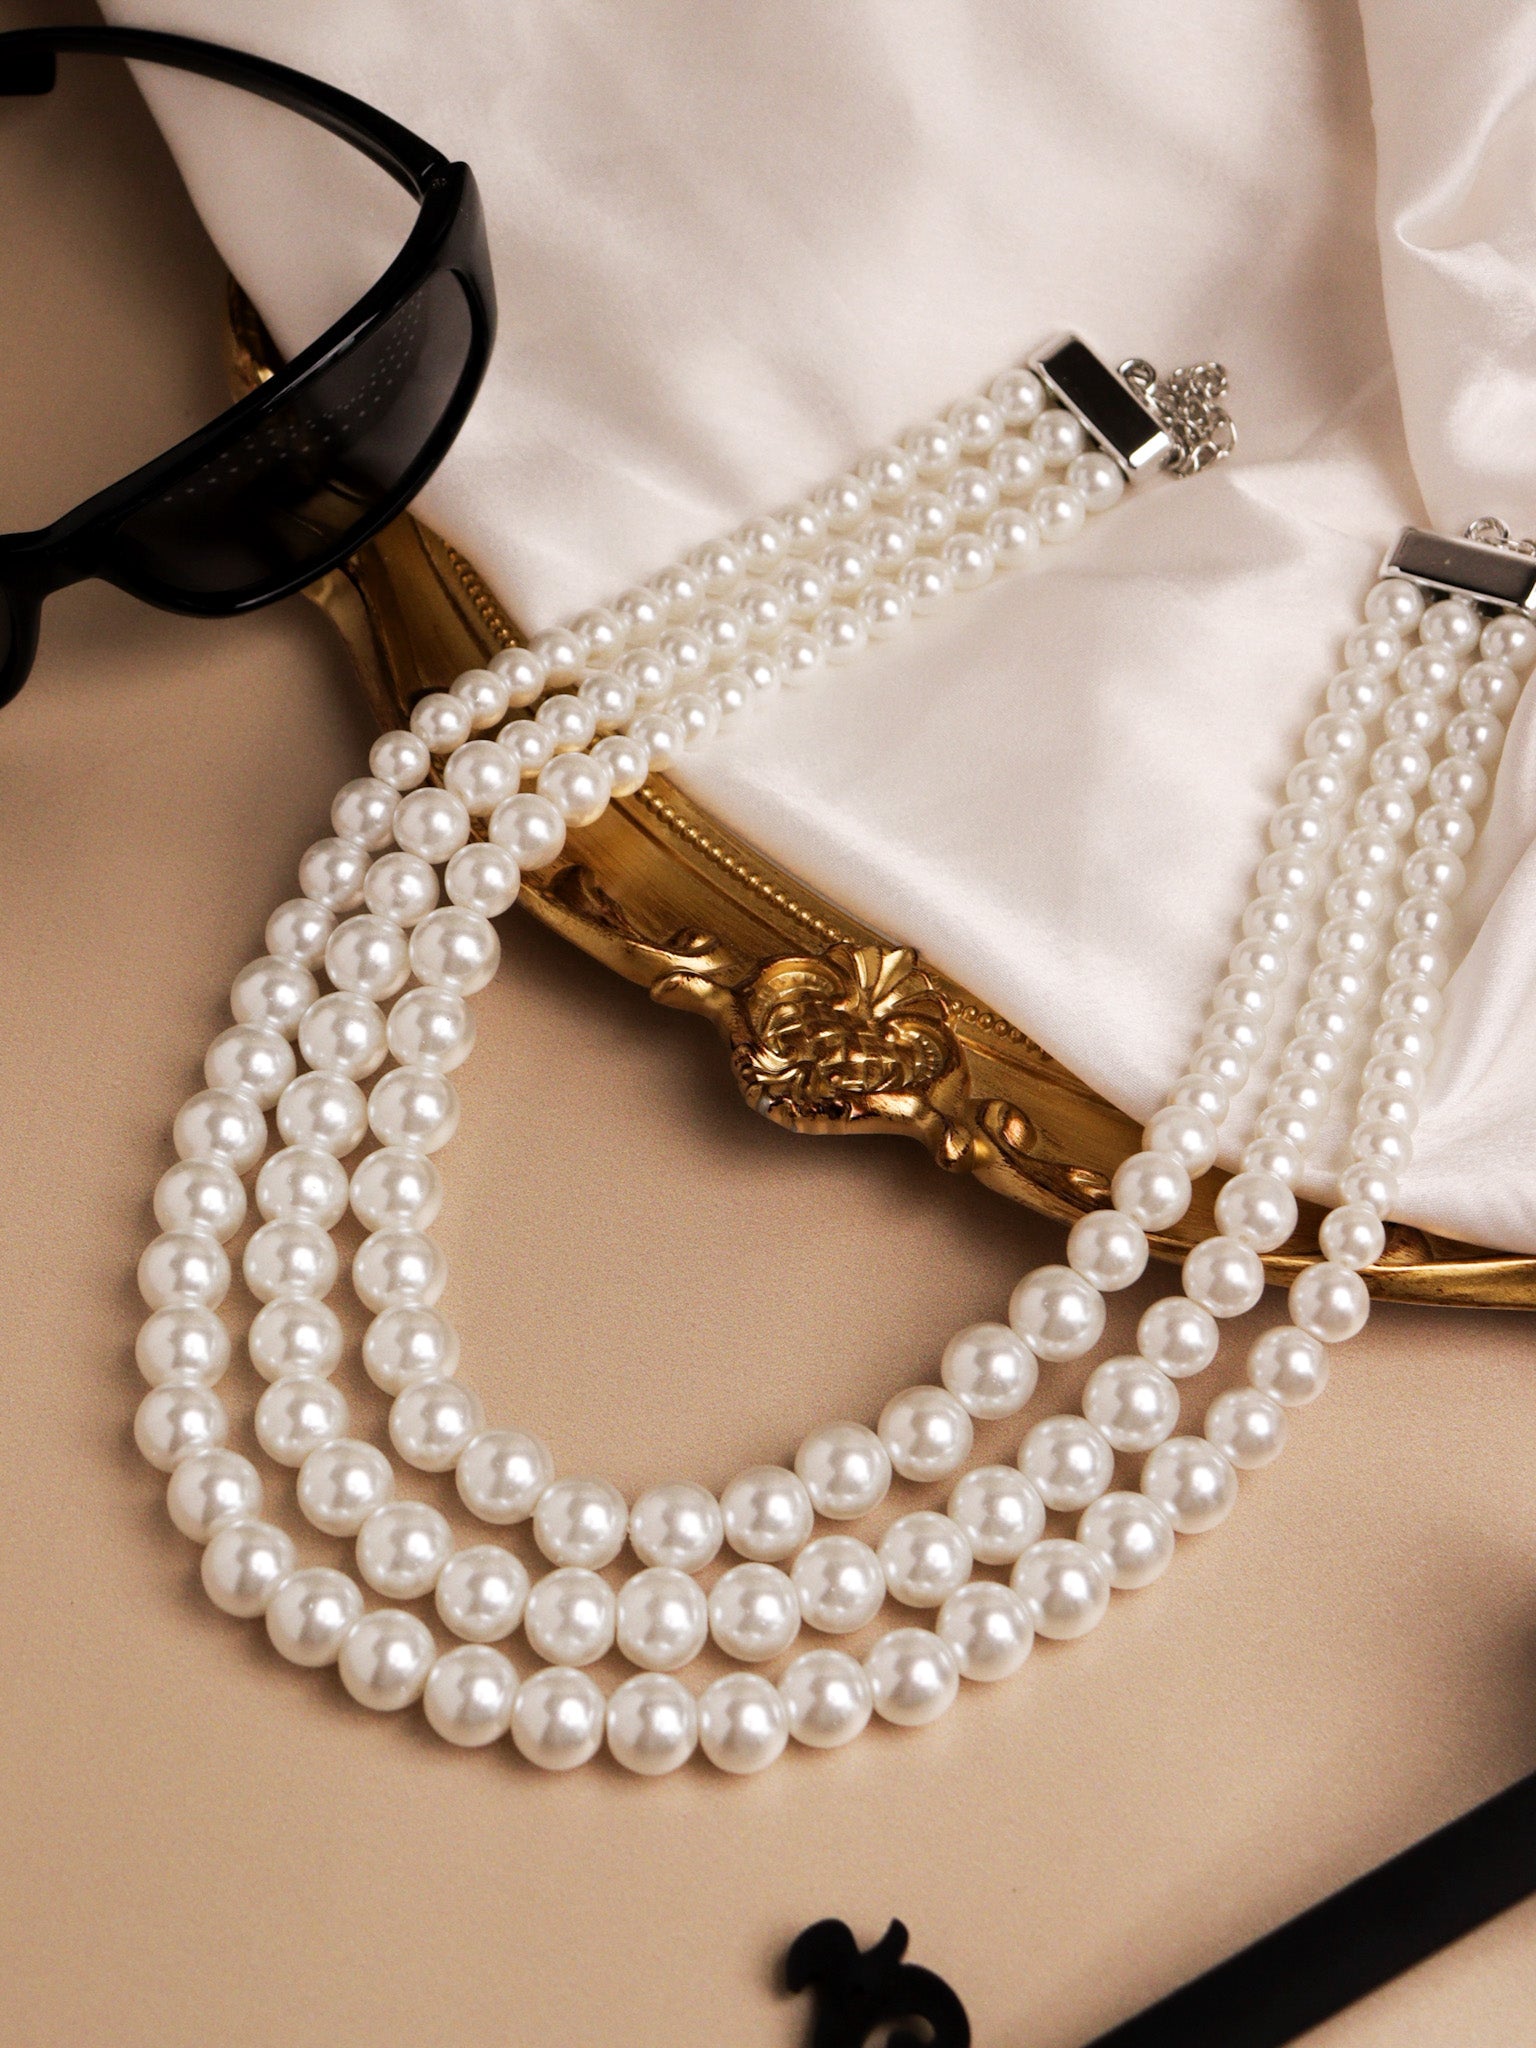  The Pearl Story - Vintage Ivory String of Pearls Necklace